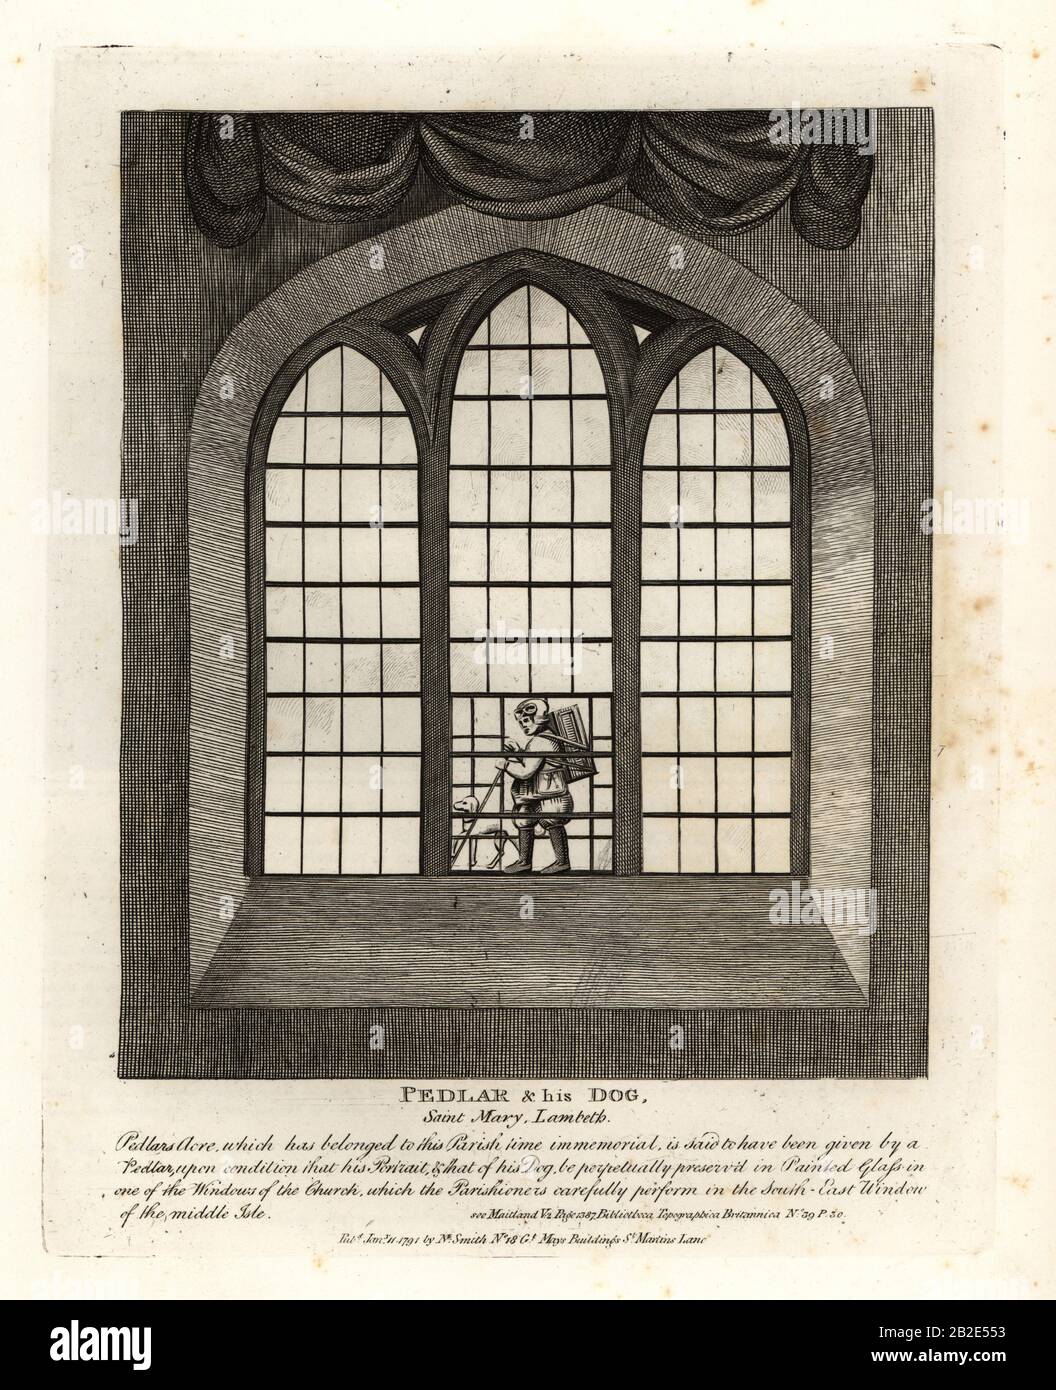 Pedlar and his dog in the stained glass window of the church at Saint Mary-at-Lambeth. Copperplate engraving by John Thomas Smith after original drawings by members of the Society of Antiquaries from his J.T. Smith’s Antiquities of London and its Environs, J. Sewell, R. Folder, J. Simco, London, 1791. Stock Photo